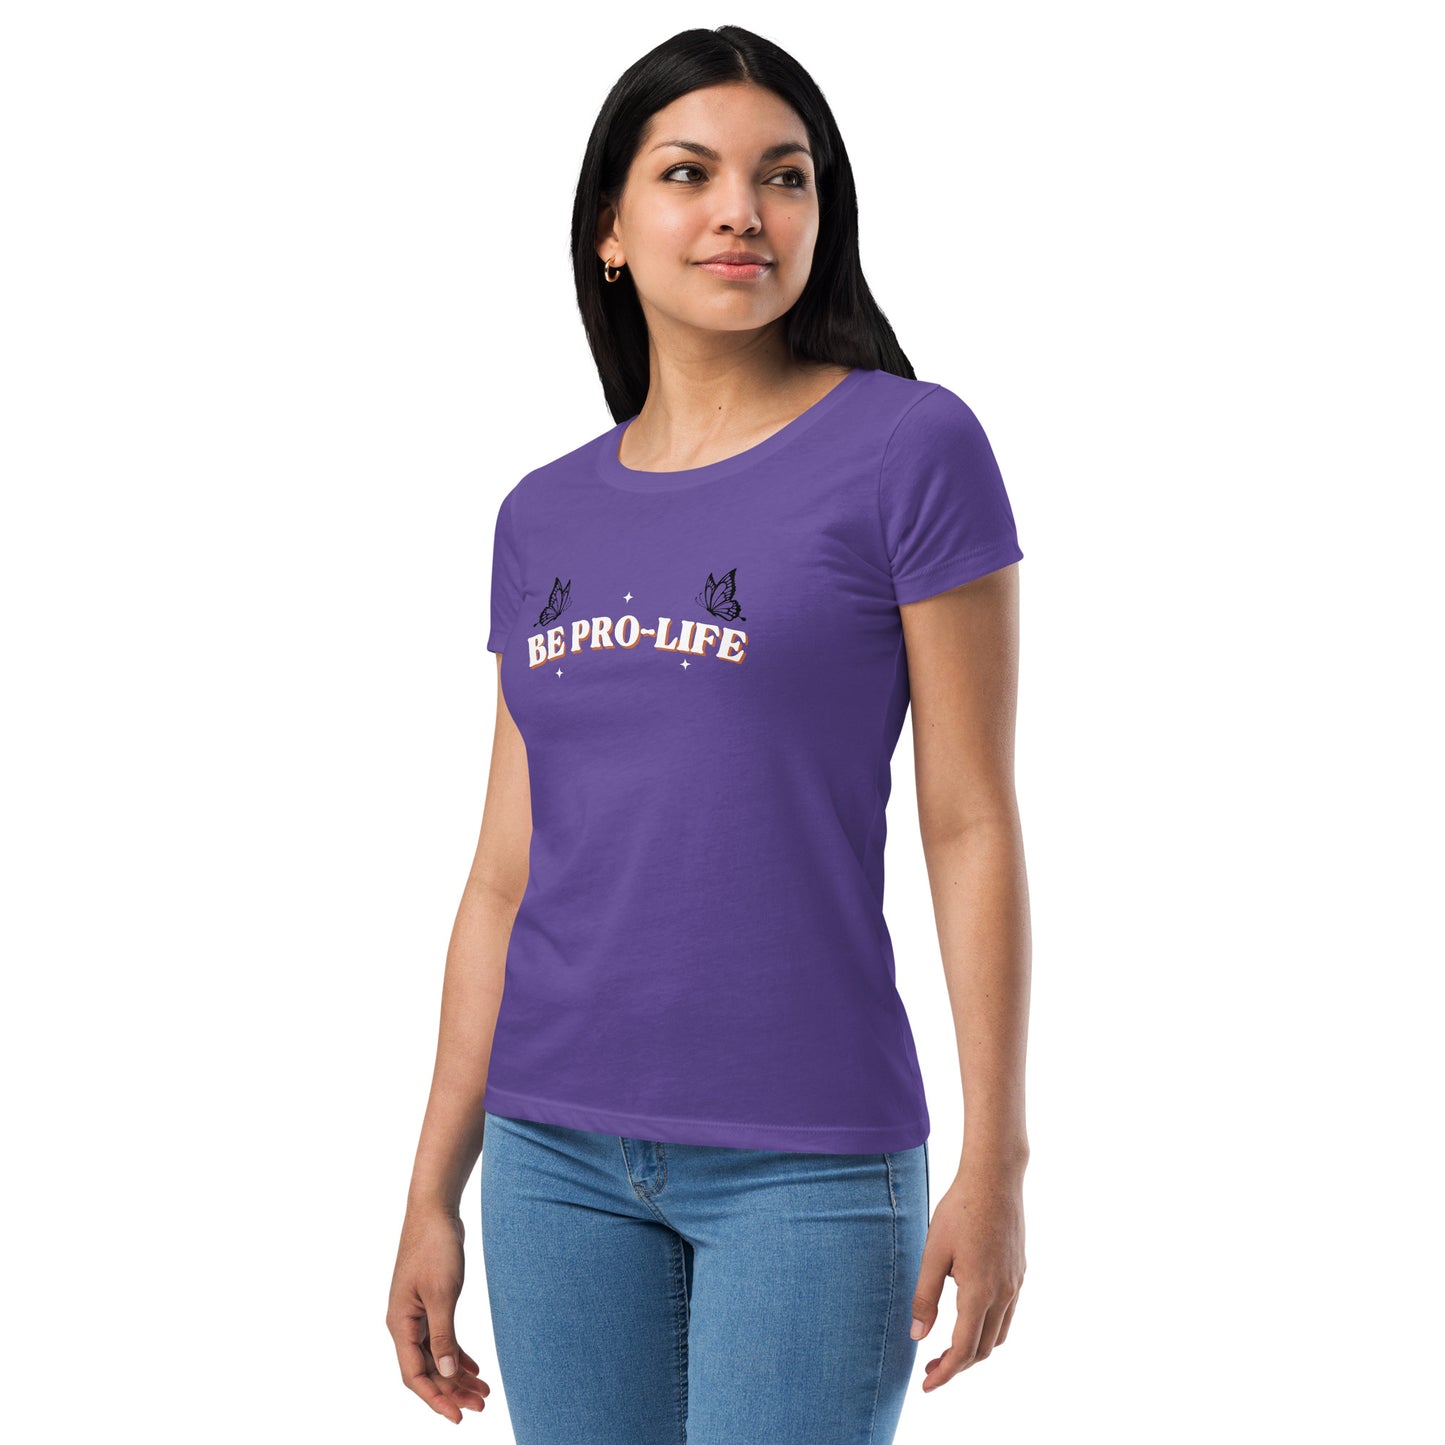 Be Pro-Life! - Women’s fitted t-shirt